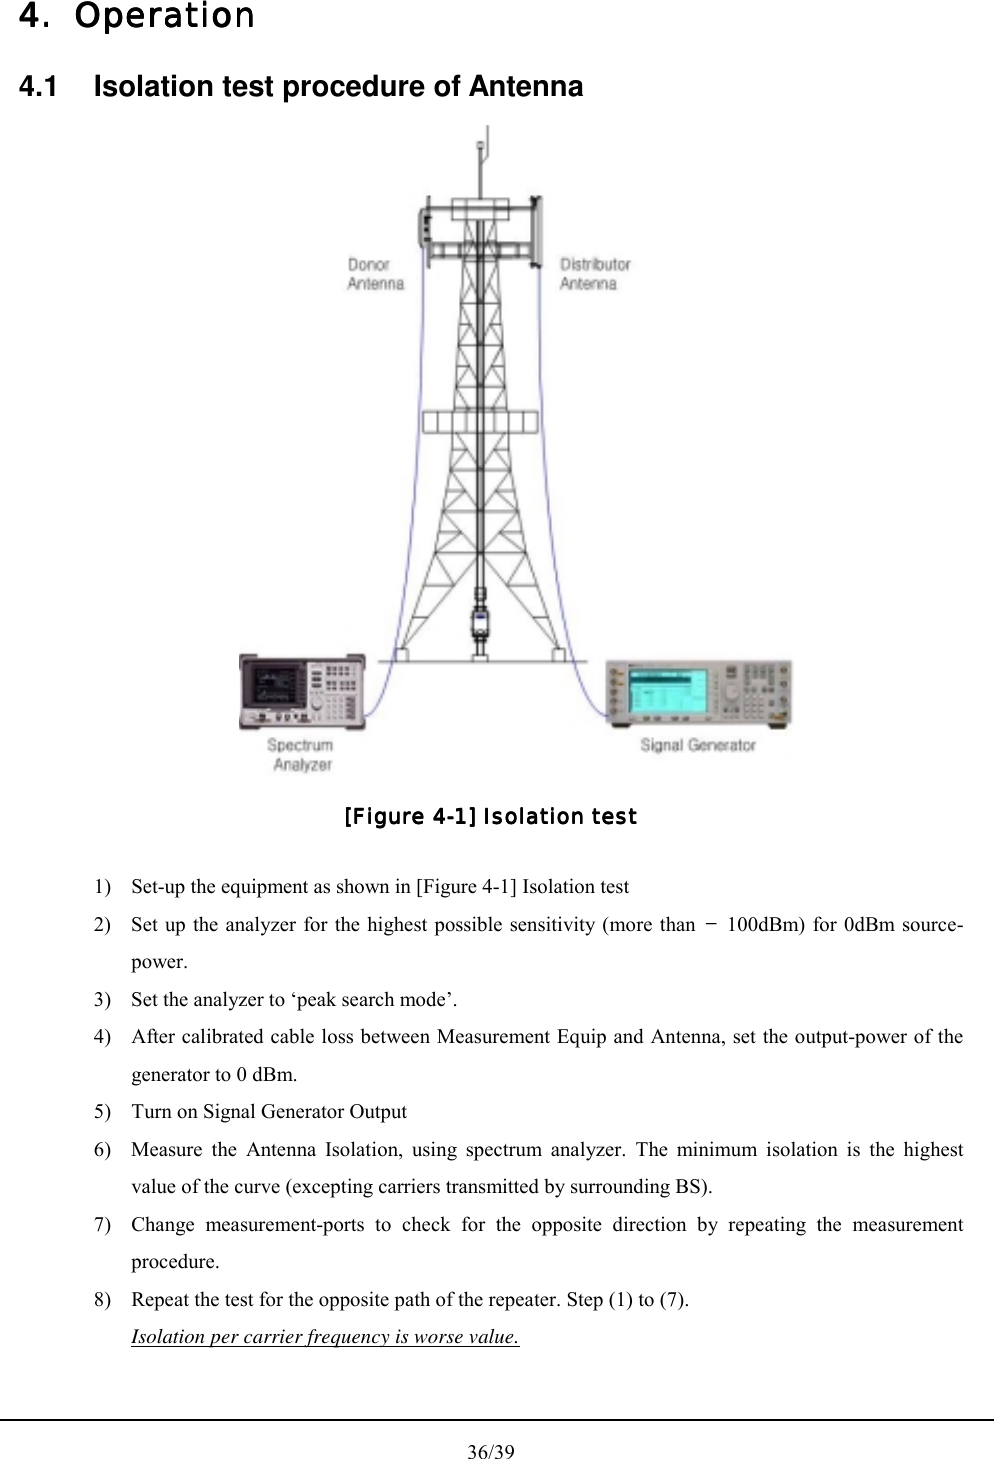  36/39 4.4.4.4.    OperatioOperatioOperatioOperationnnn    4.1  Isolation test procedure of Antenna  [Figure 4[Figure 4[Figure 4[Figure 4----1] Isolation test1] Isolation test1] Isolation test1] Isolation test     1)  Set-up the equipment as shown in [Figure 4-1] Isolation test 2)  Set up the analyzer for the highest possible sensitivity (more than  100dBm) for 0dBm source-power. 3)  Set the analyzer to ‘peak search mode’. 4)  After calibrated cable loss between Measurement Equip and Antenna, set the output-power of the generator to 0 dBm. 5)  Turn on Signal Generator Output 6)  Measure the Antenna Isolation, using spectrum analyzer. The minimum isolation is the highest value of the curve (excepting carriers transmitted by surrounding BS).   7)  Change measurement-ports to check for the opposite direction by repeating the measurement procedure. 8)  Repeat the test for the opposite path of the repeater. Step (1) to (7). Isolation per carrier frequency is worse value. 